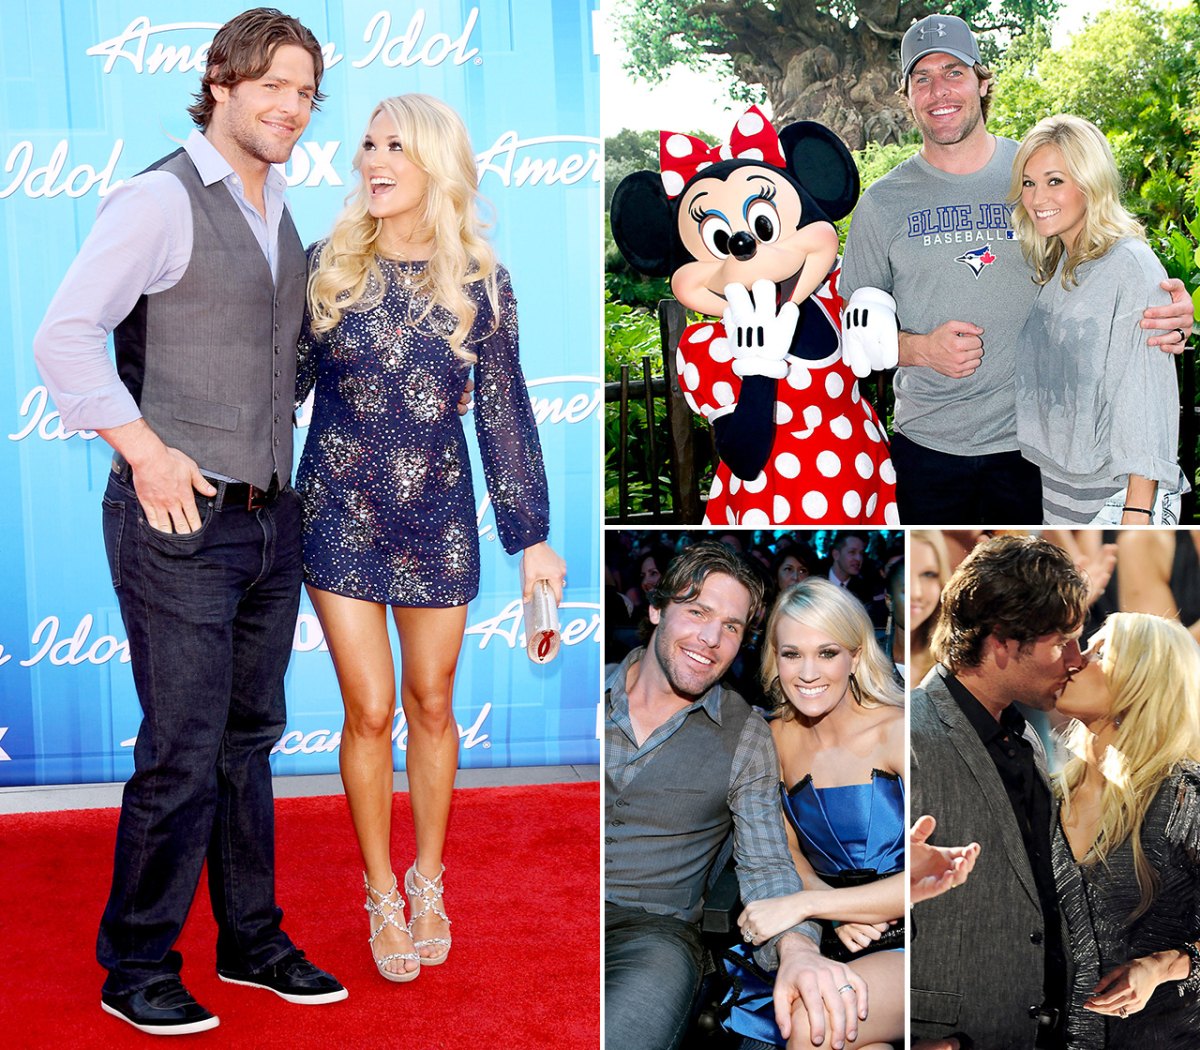 Carrie Underwood Fighting With Her Husband Mike Fisher Over ‘Roving Eye’?